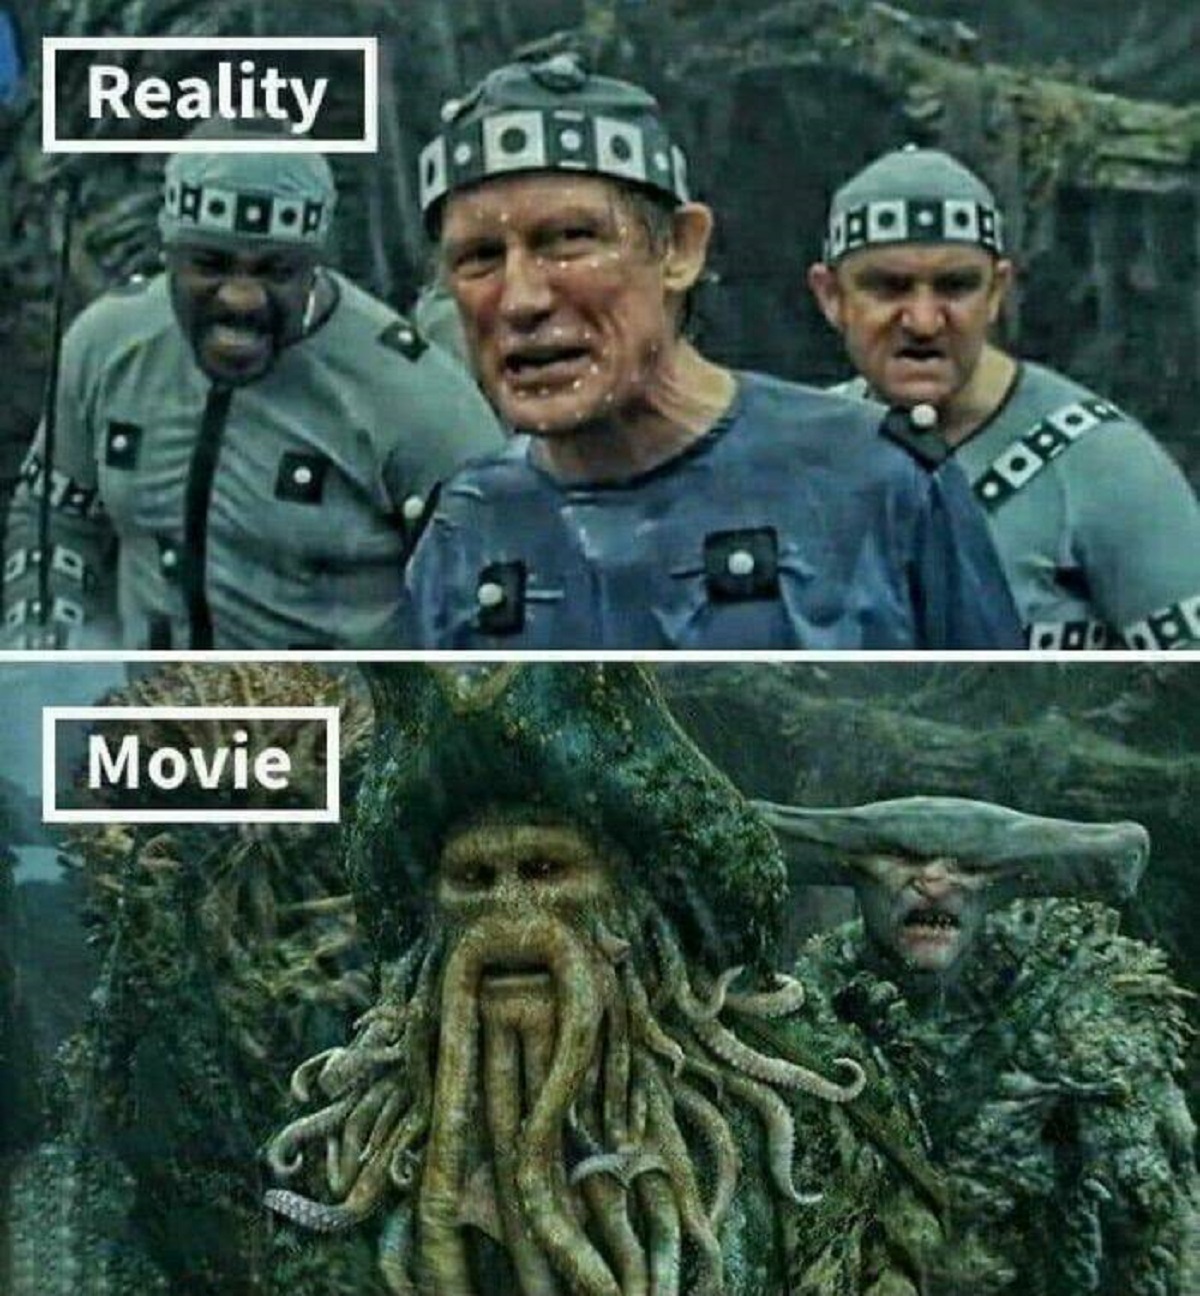 "Behind The Cgi In The Pirates Of The Caribbean, 2000's"